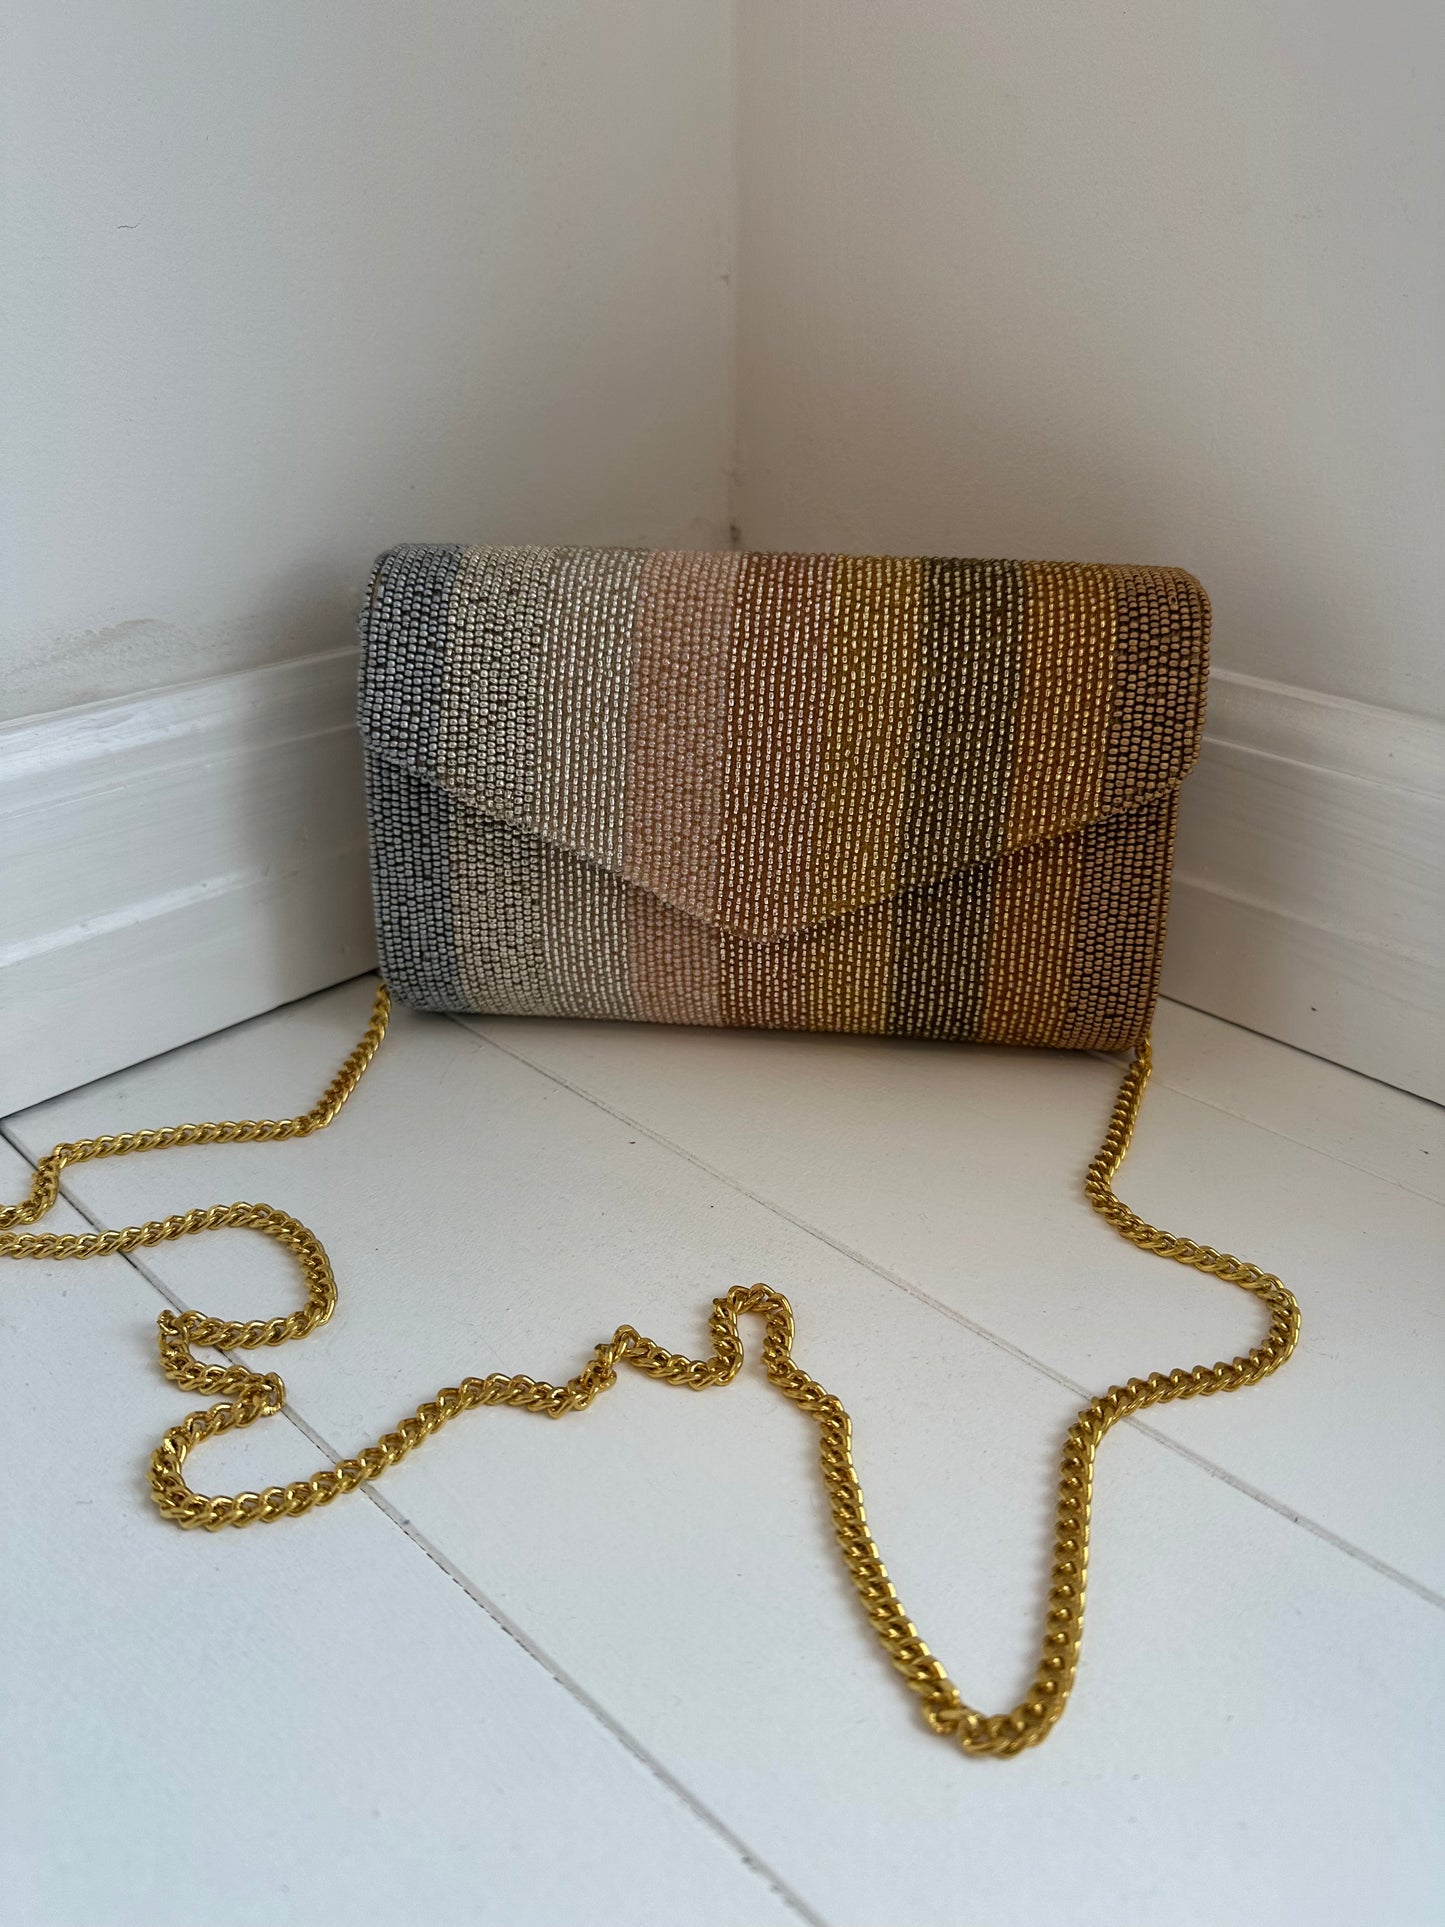 GOLD SILVER OMBRE CLUTCH